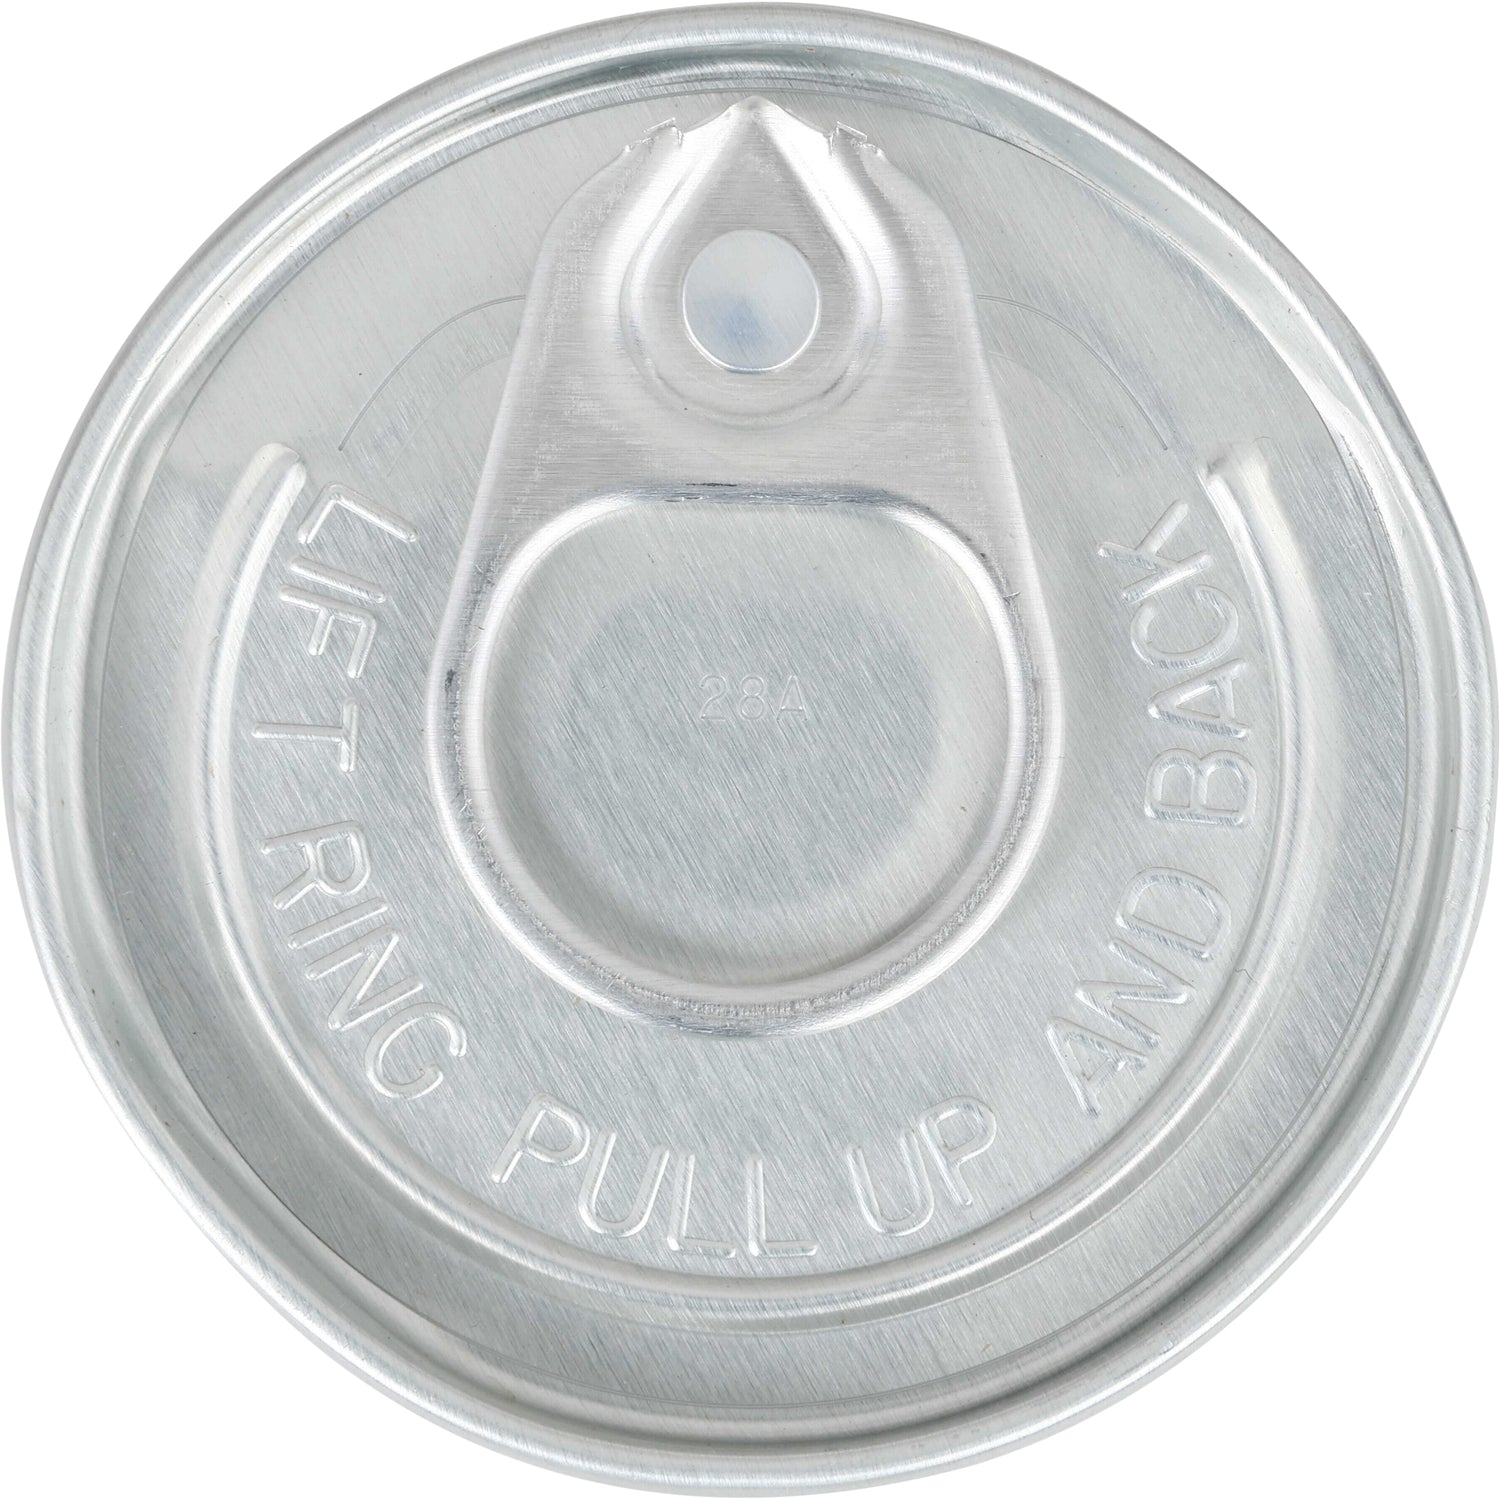 Metal pull tab on white background with pressed words that read &quot;Lift Ring Pull Up and Back&quot;